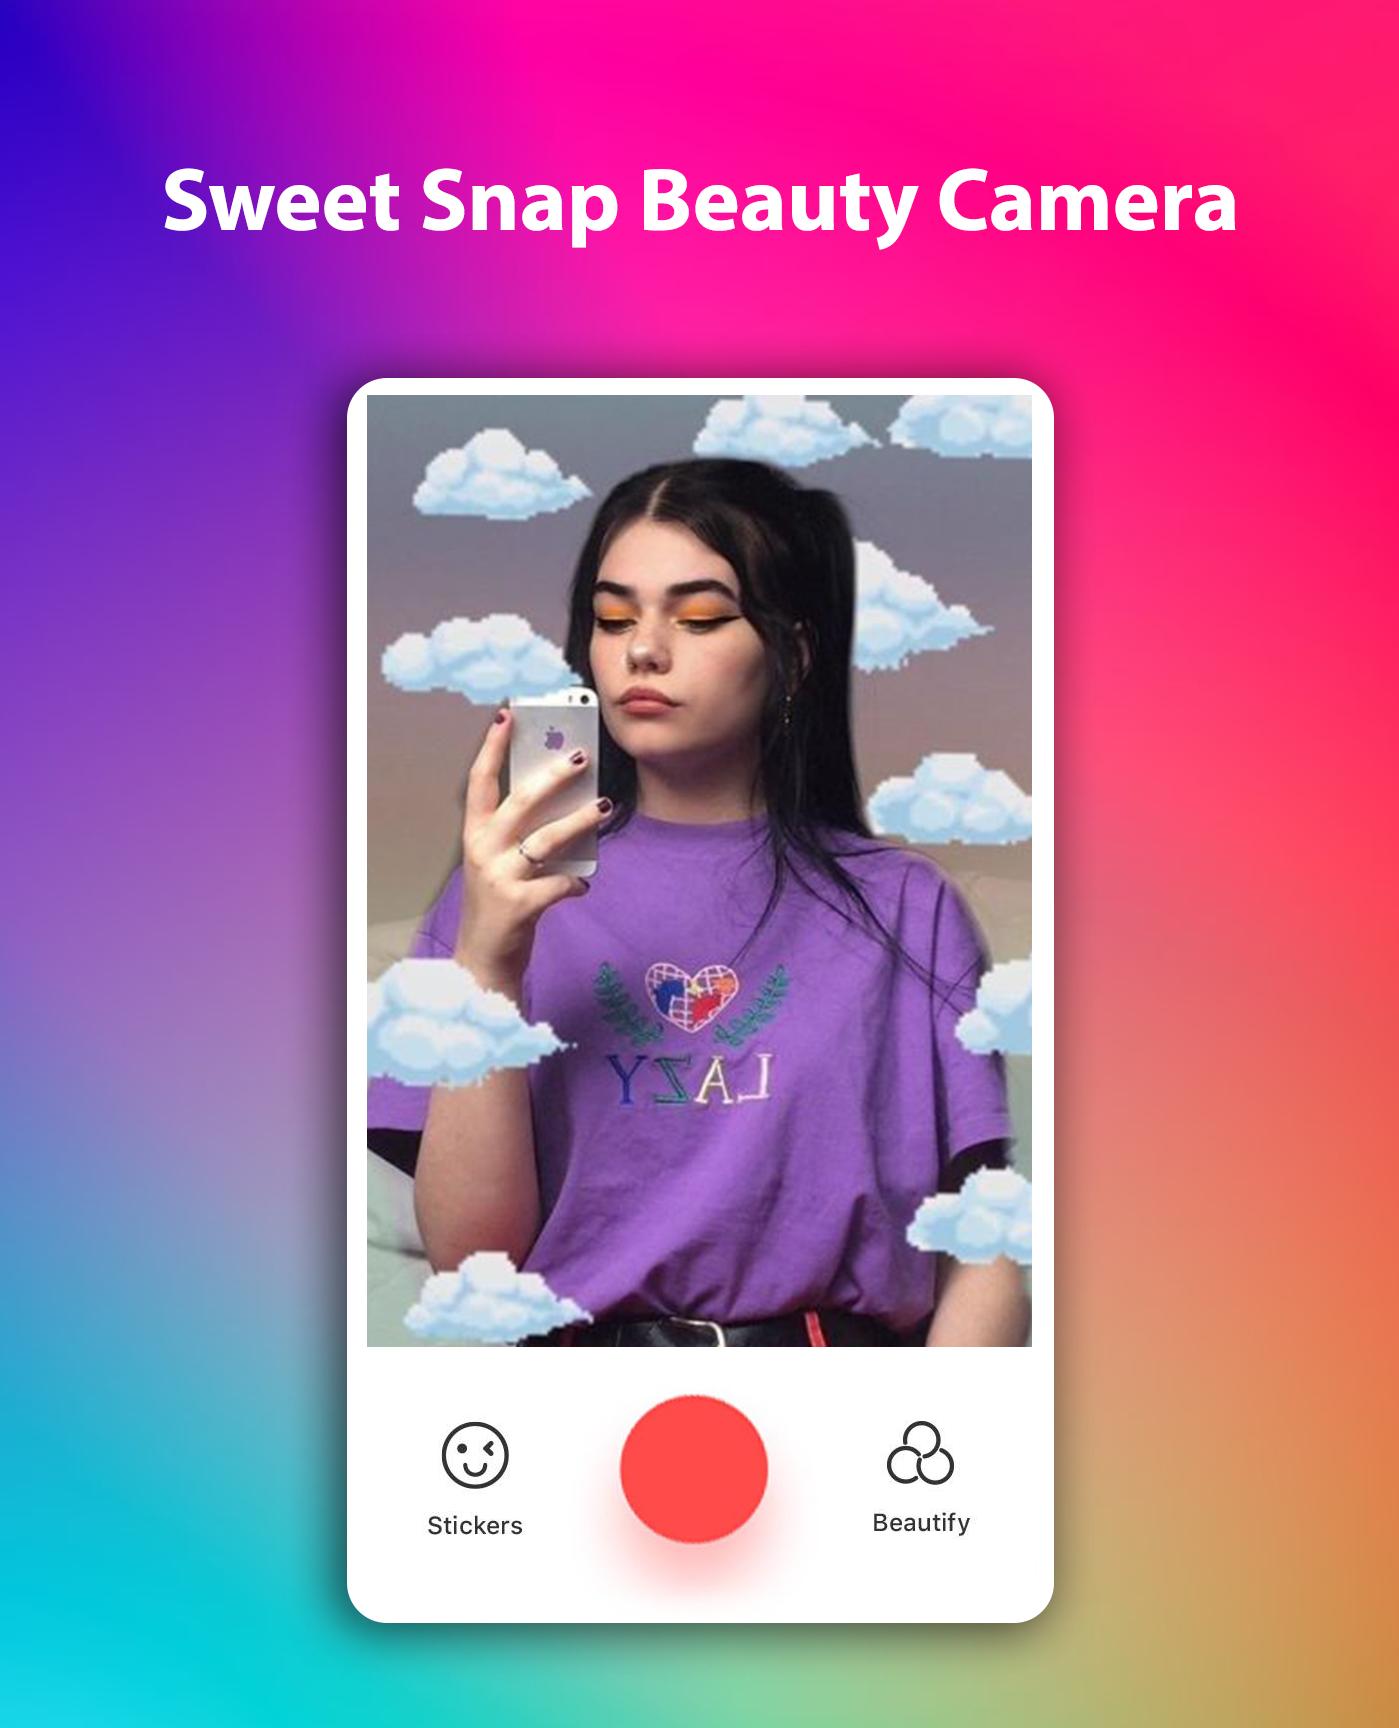 Sweet Snap for Android - APK Download